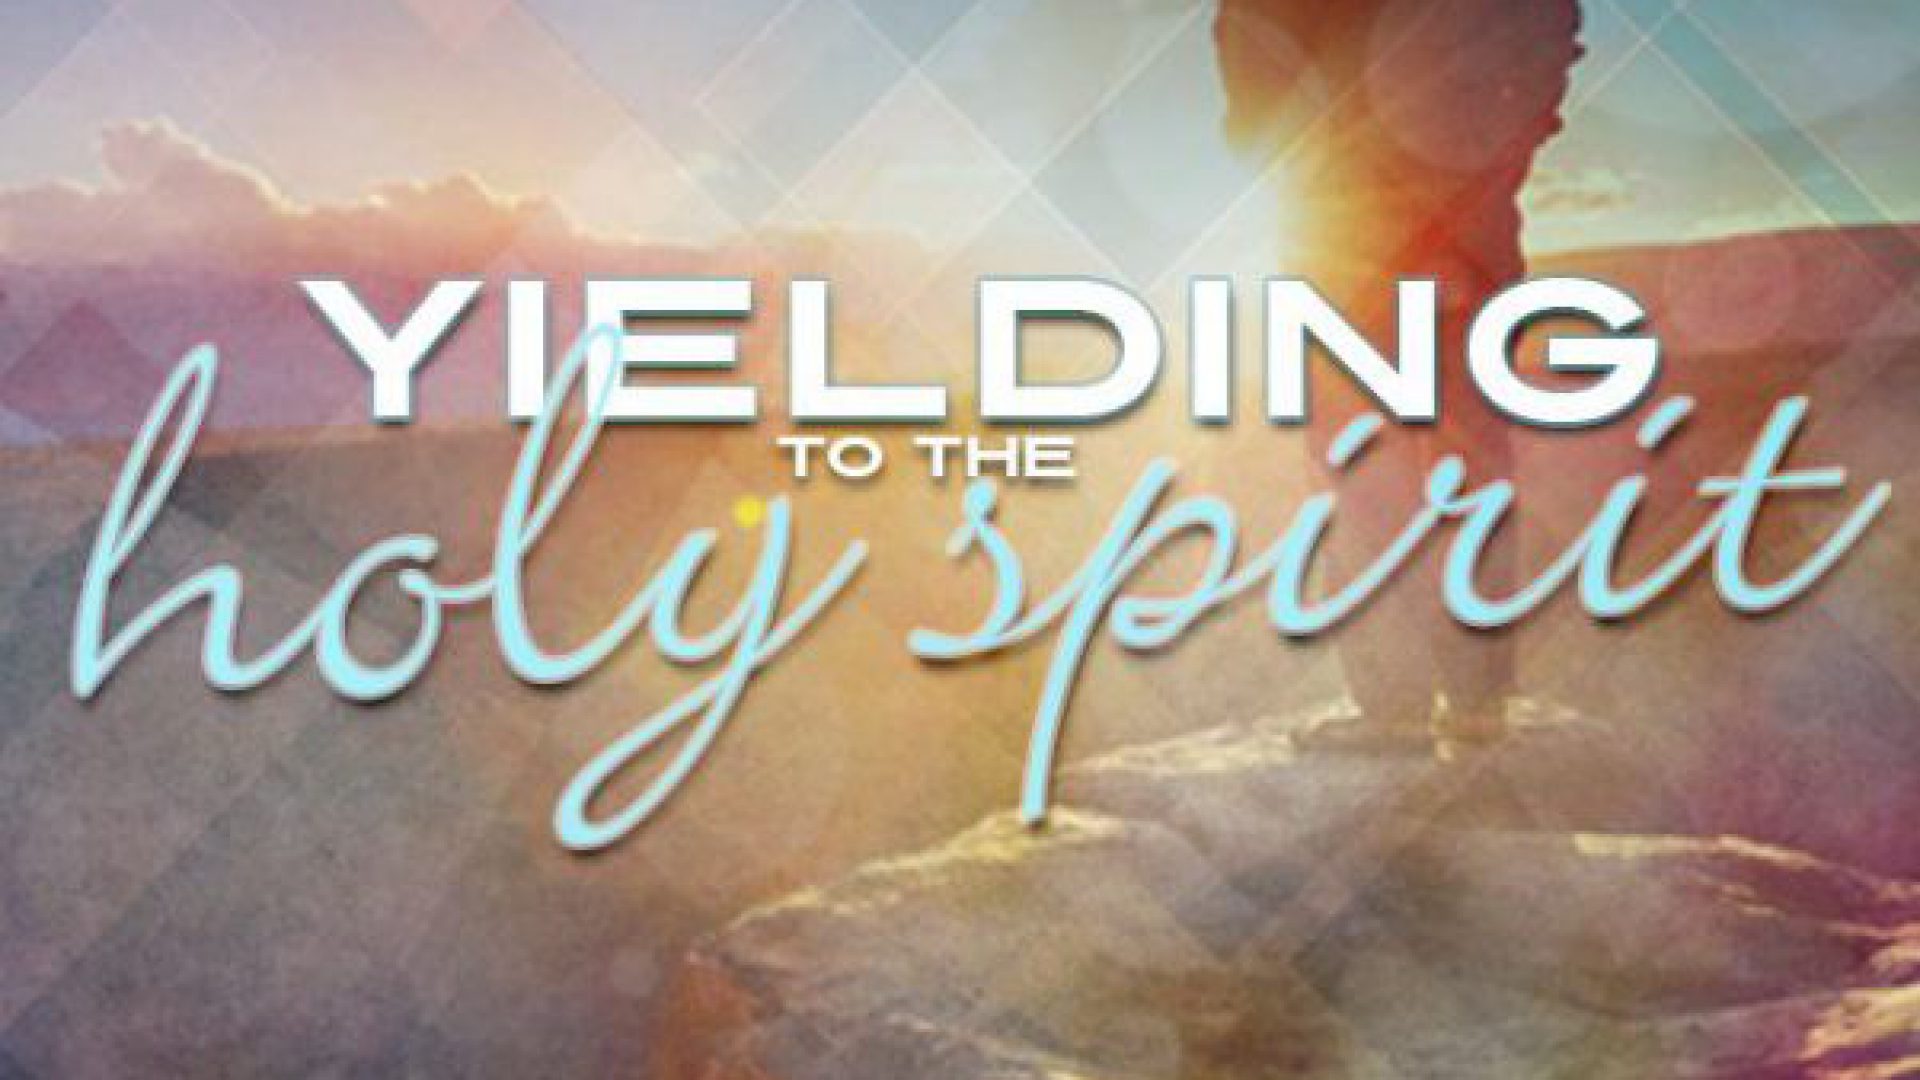 YIELDING TO THE HOLY SPIRIT